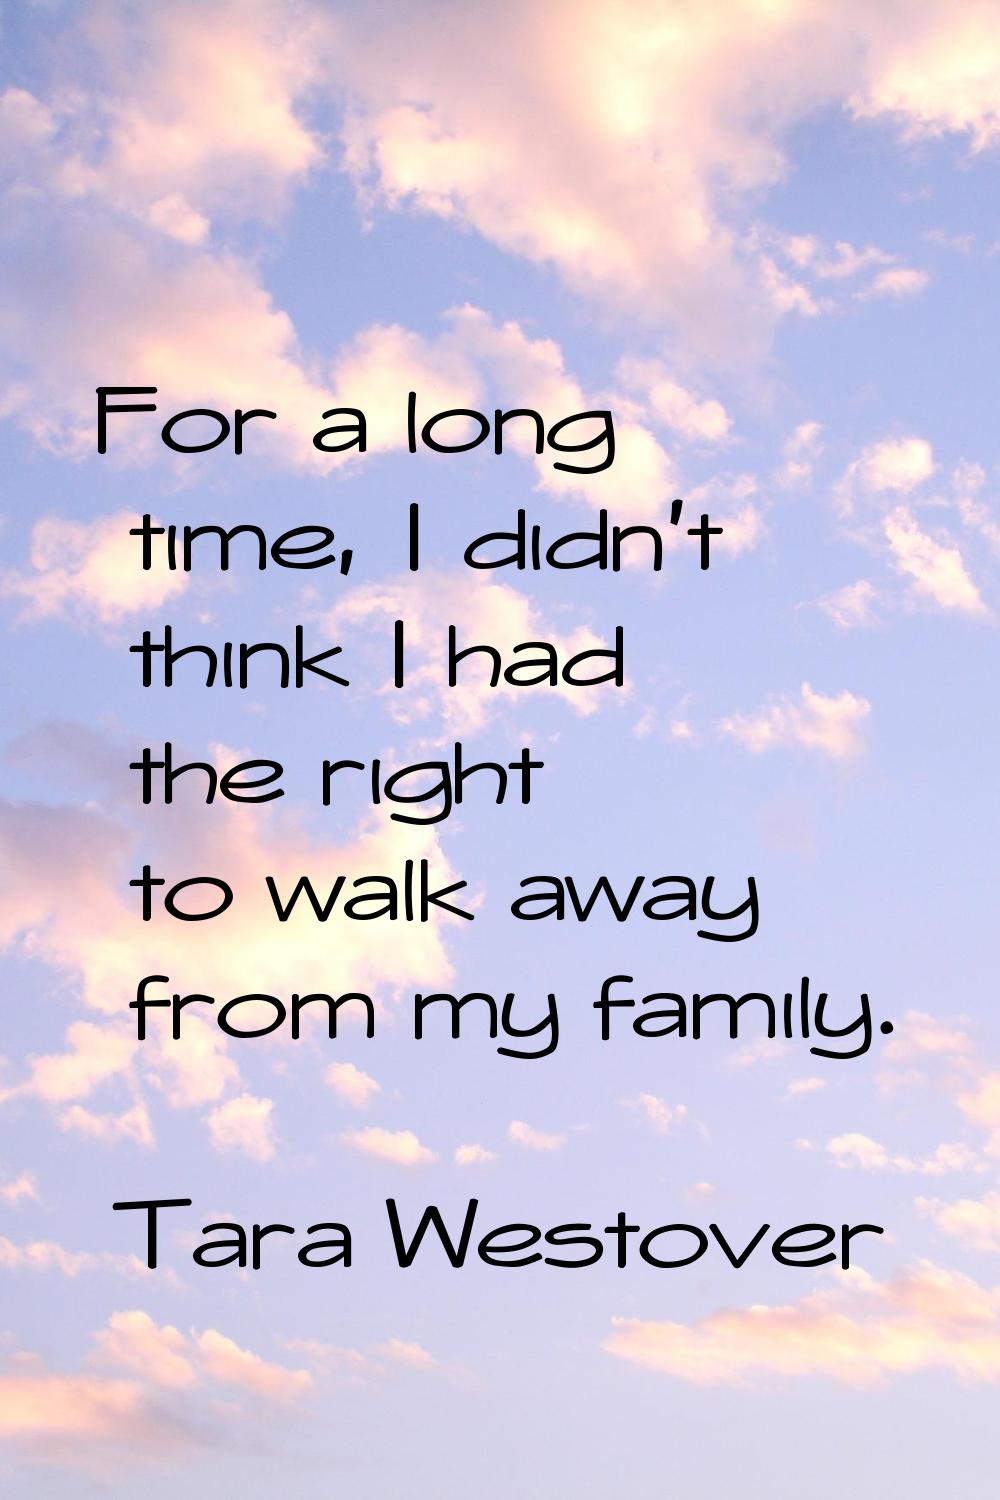 For a long time, I didn't think I had the right to walk away from my family.